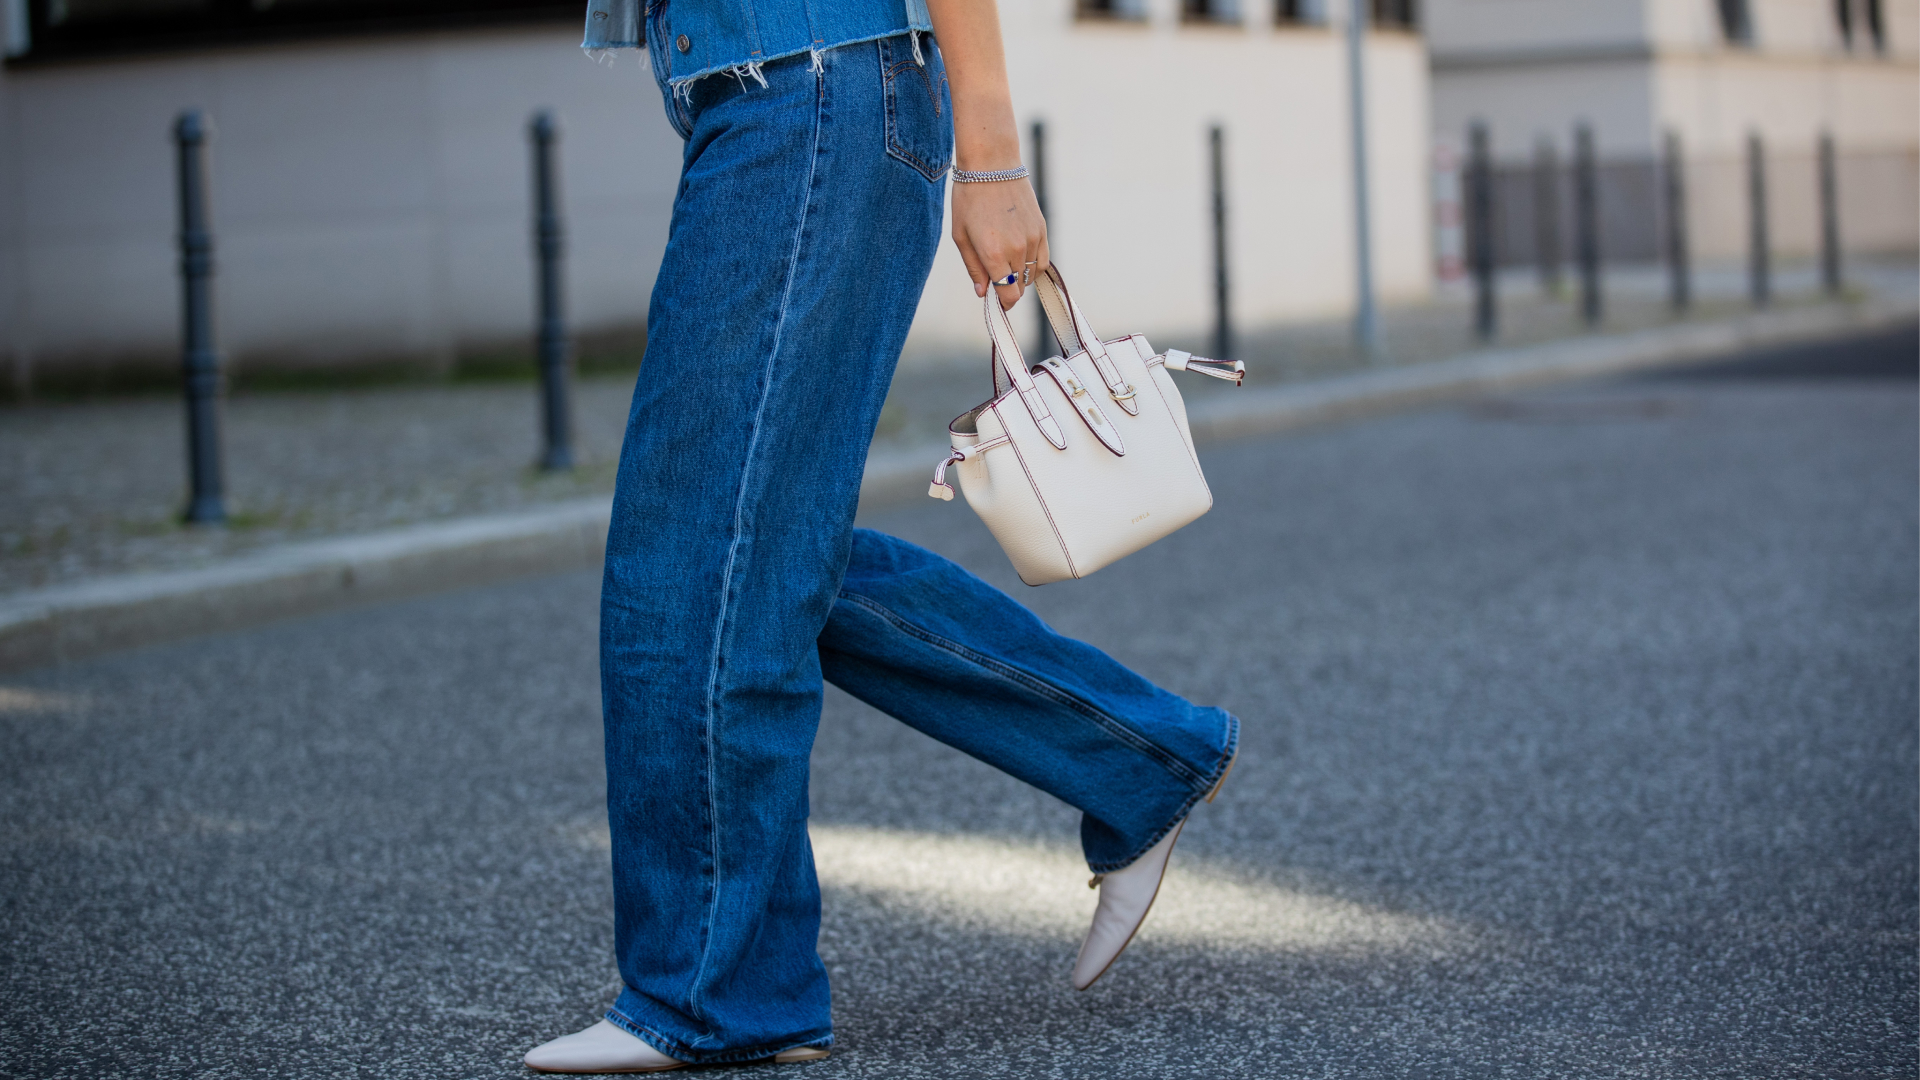 The Time Is Now Boot Cut Jeans, Dark Wash – Chic Soul